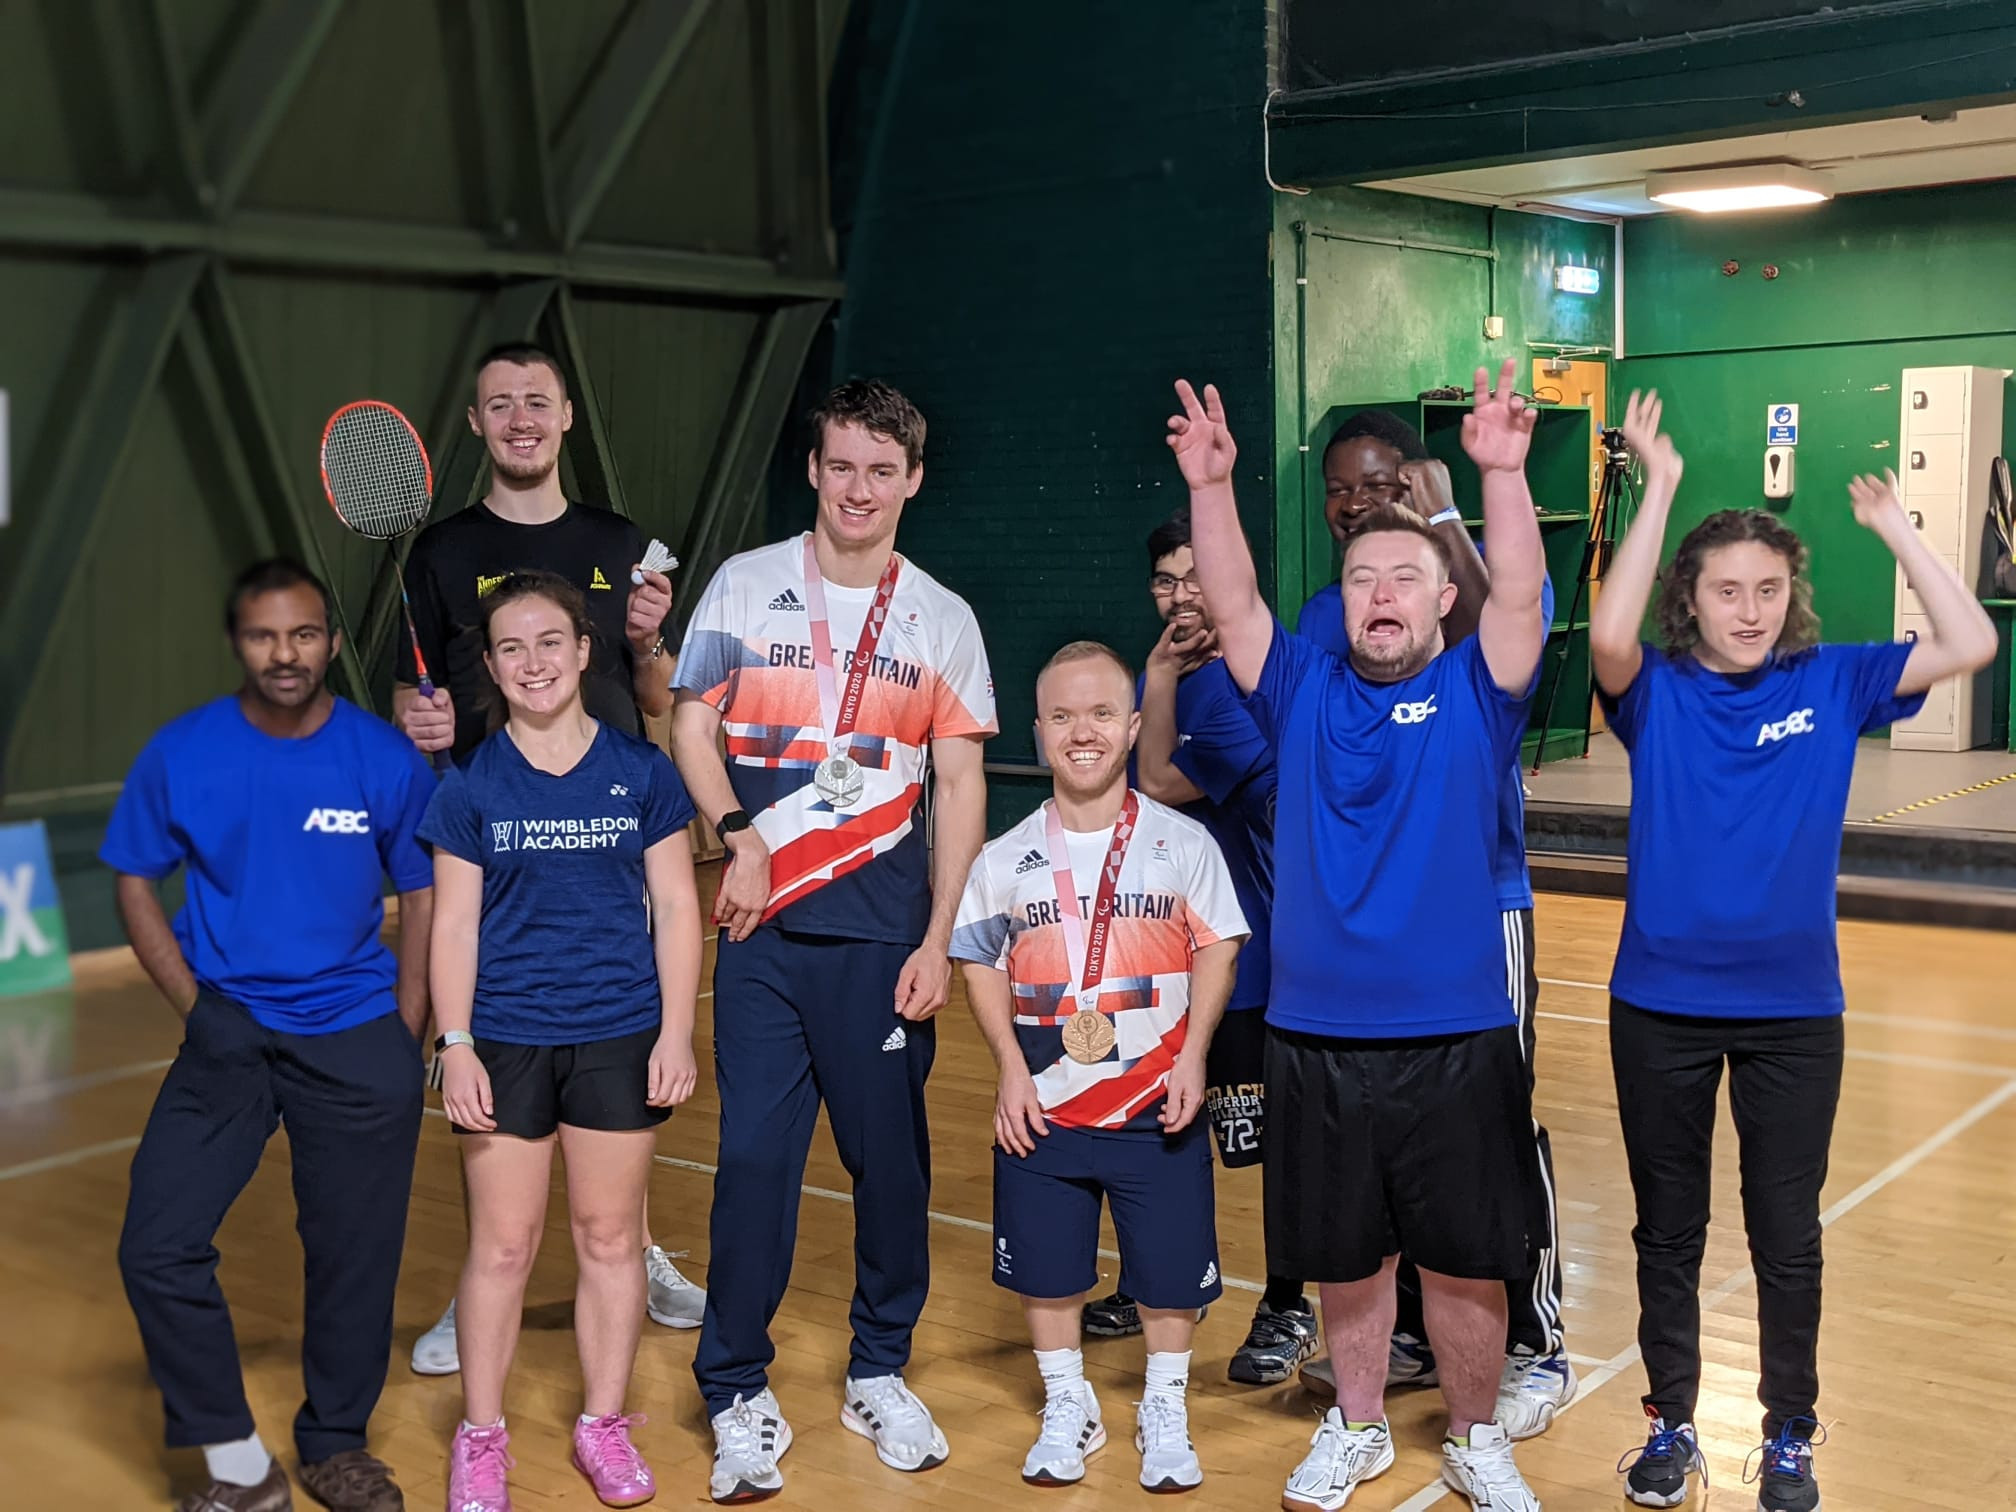 Paralympic medallists launch Badminton England's Big Hit campaign